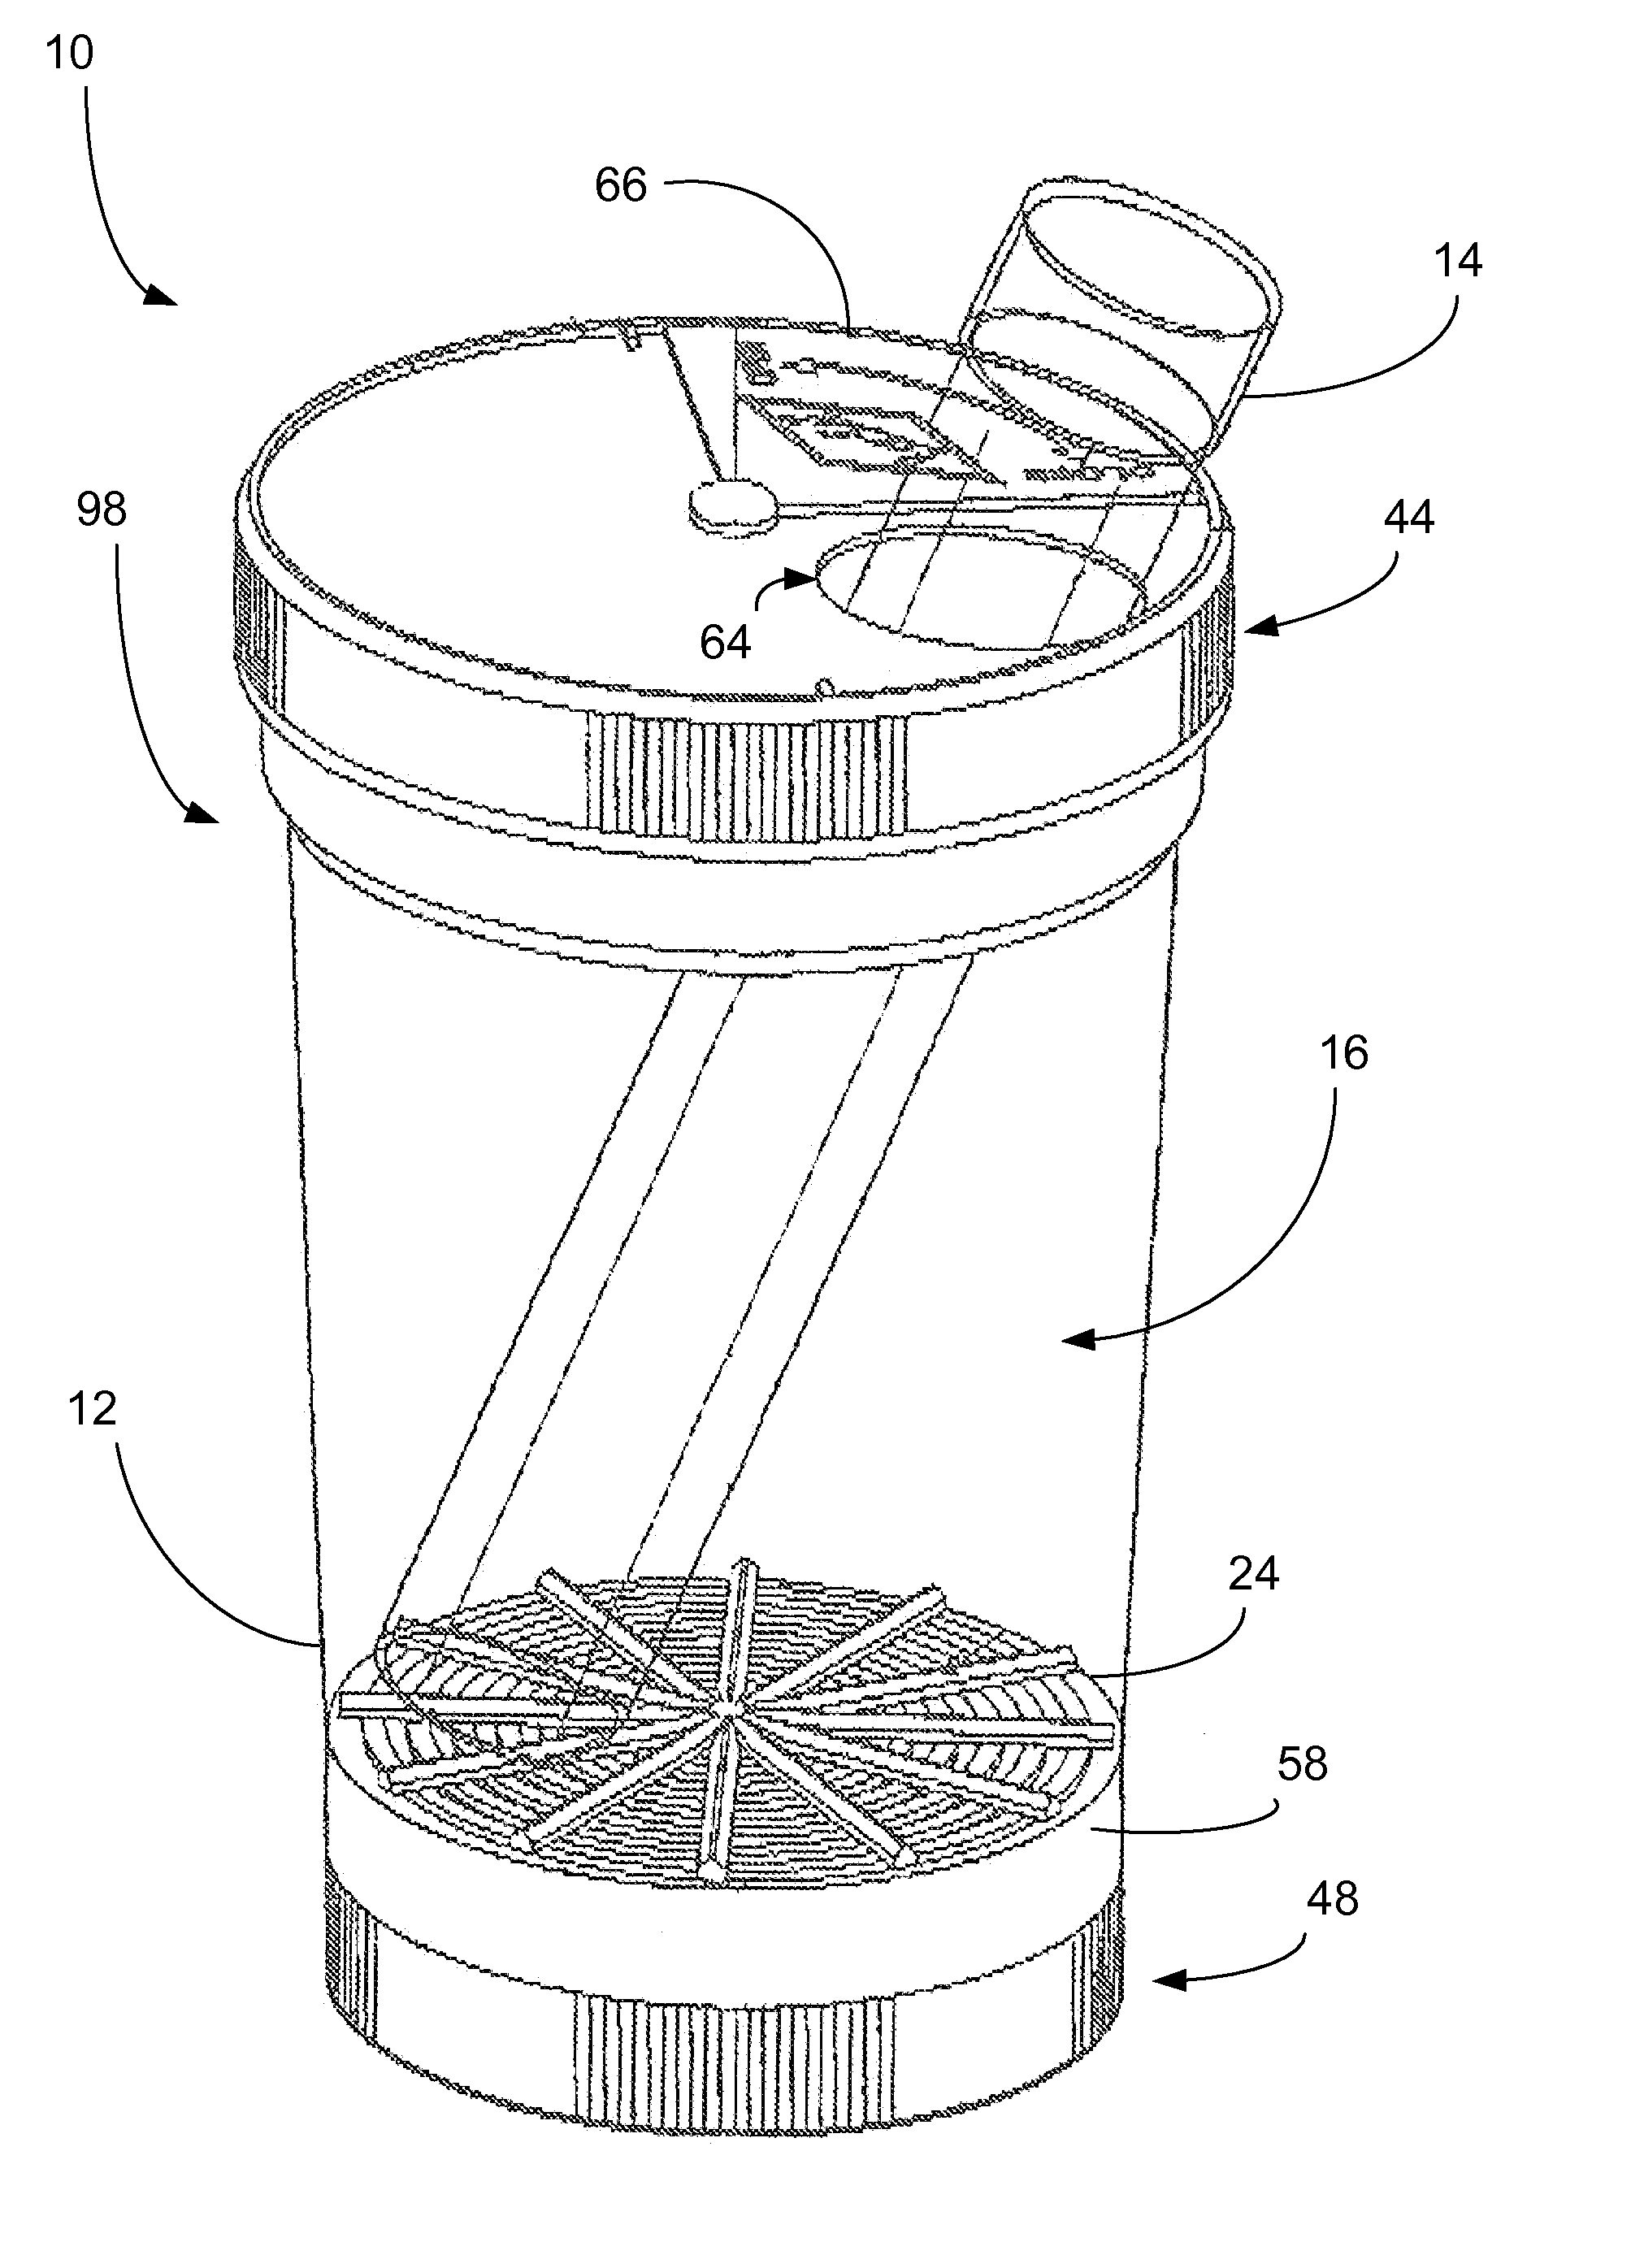 Insect dusting apparatus and method